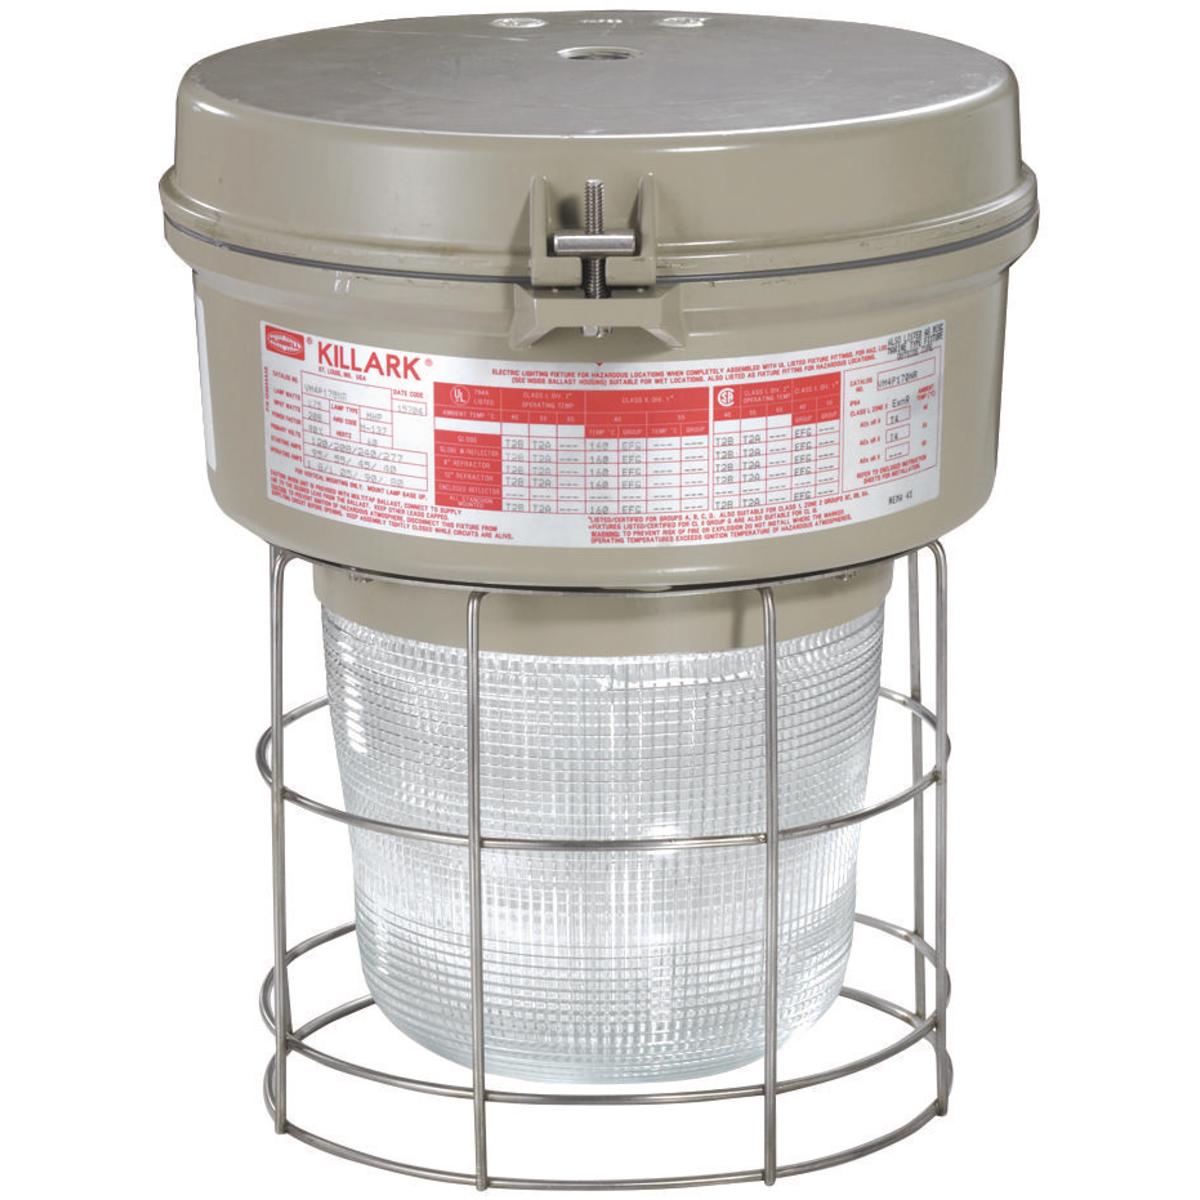 Hubbell VM4S075F2GLG VM4 Series - 70W High Pressure Sodium 480V - 3/4" Flexible Pendant - Globe and Guard  ; Ballast tank and splice box – corrosion resistant copper-free aluminum alloy with baked powder epoxy/polyester finish, electrostatically applied for complete, uniform 